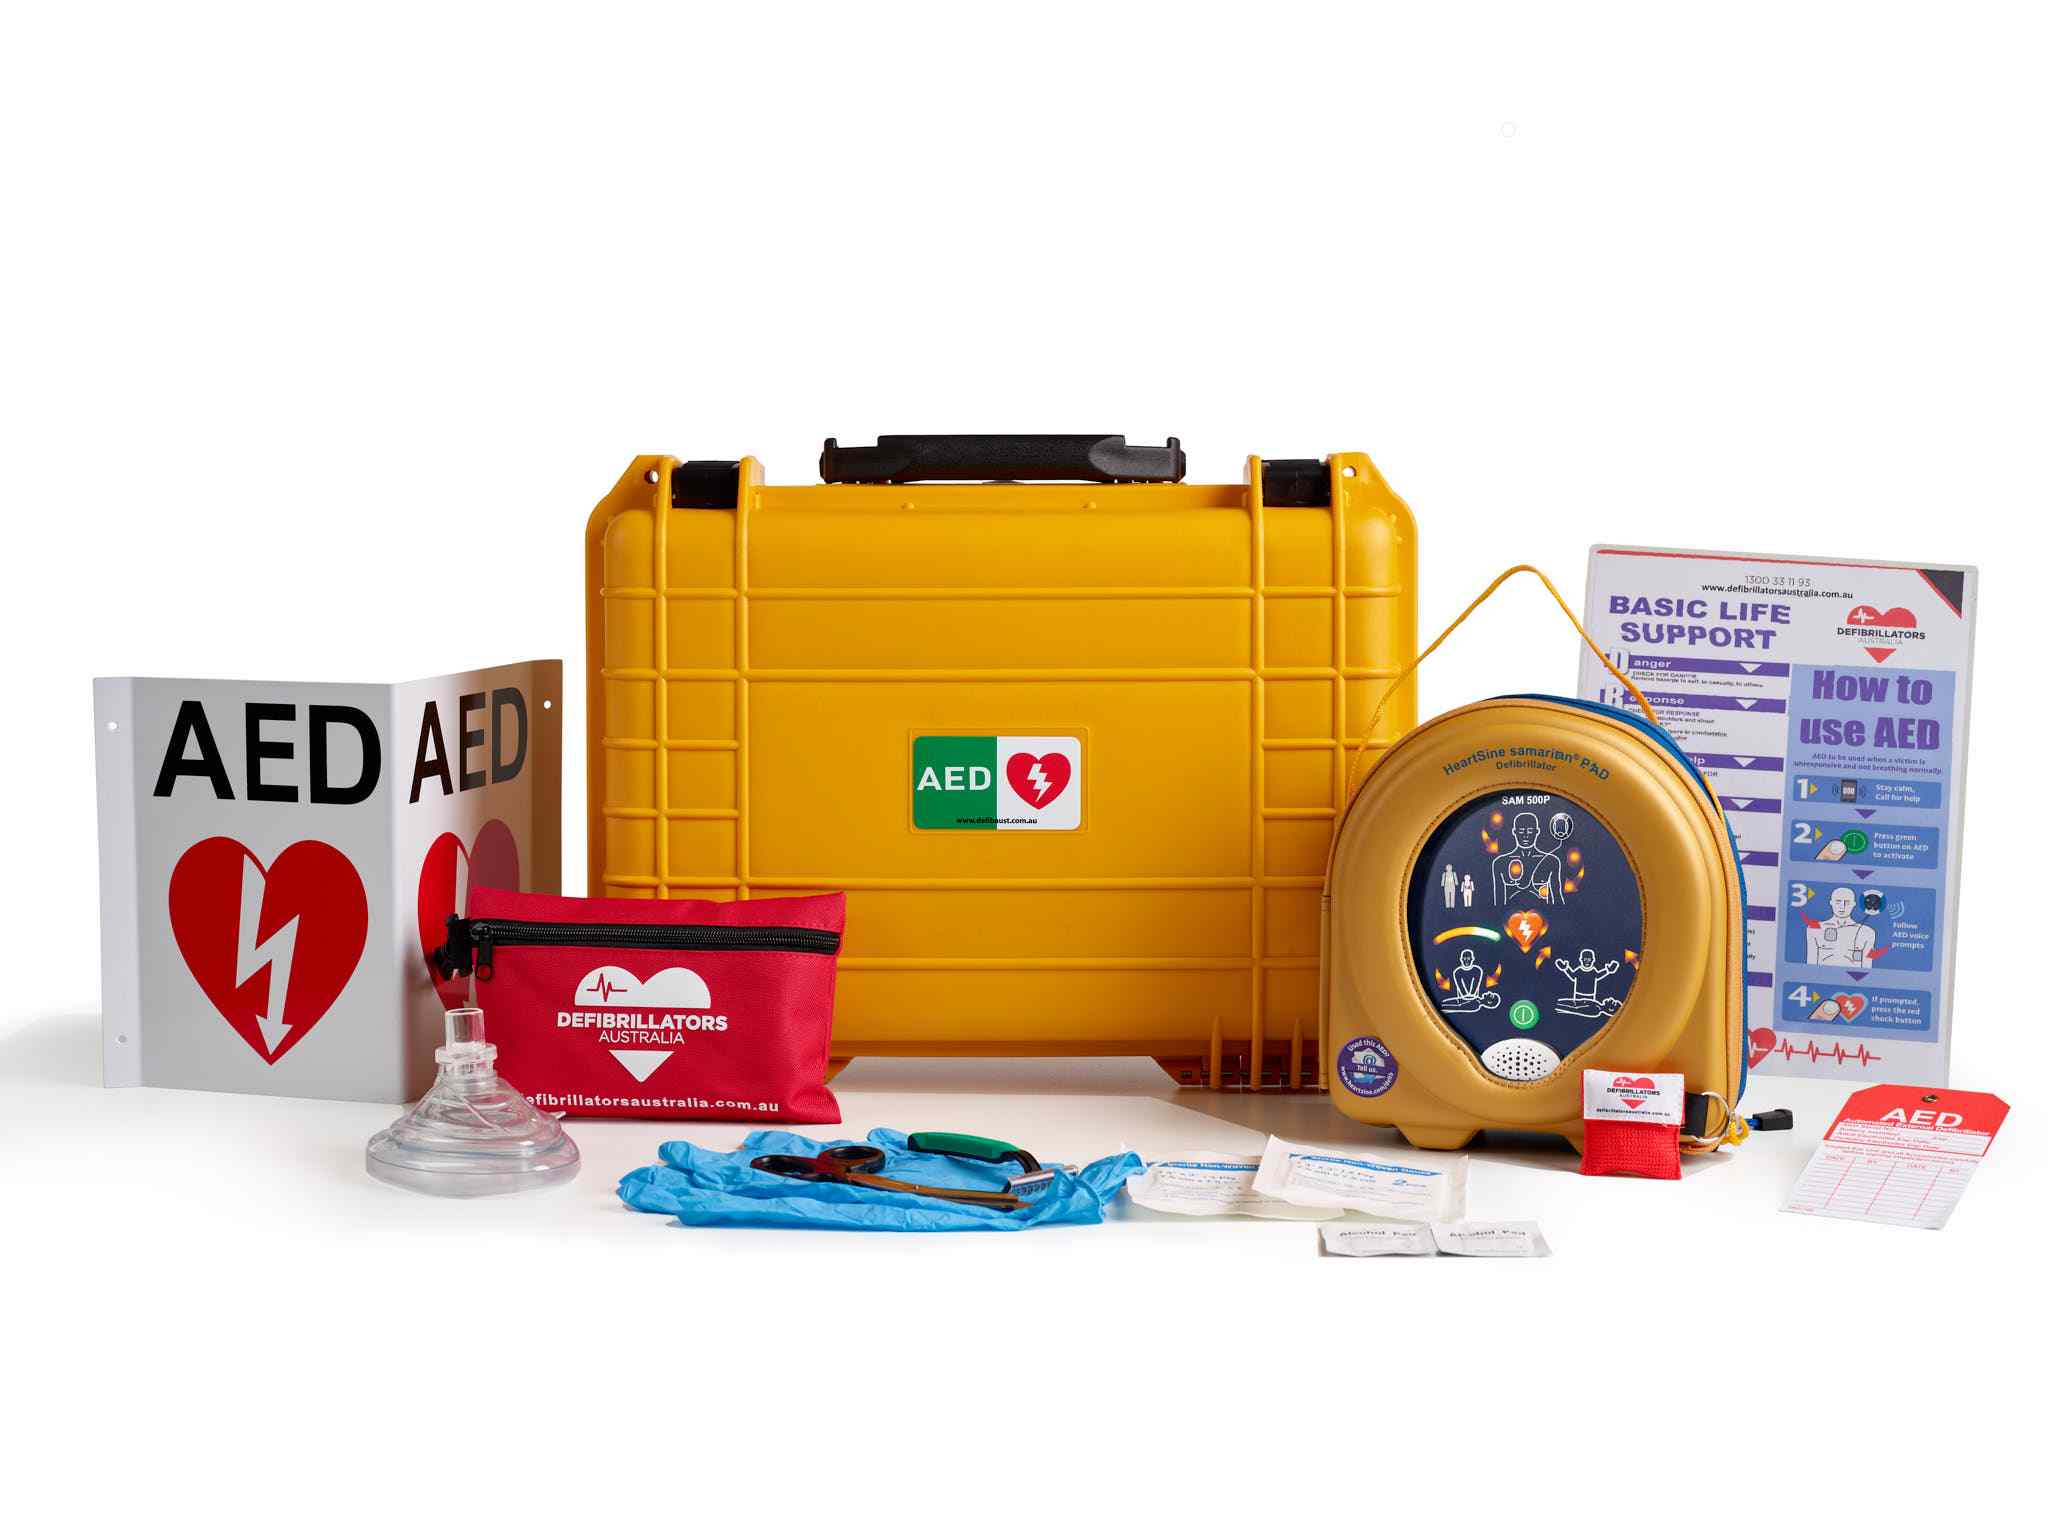 Top 5 Must-Have Defibrillator Accessories for Emergency Response